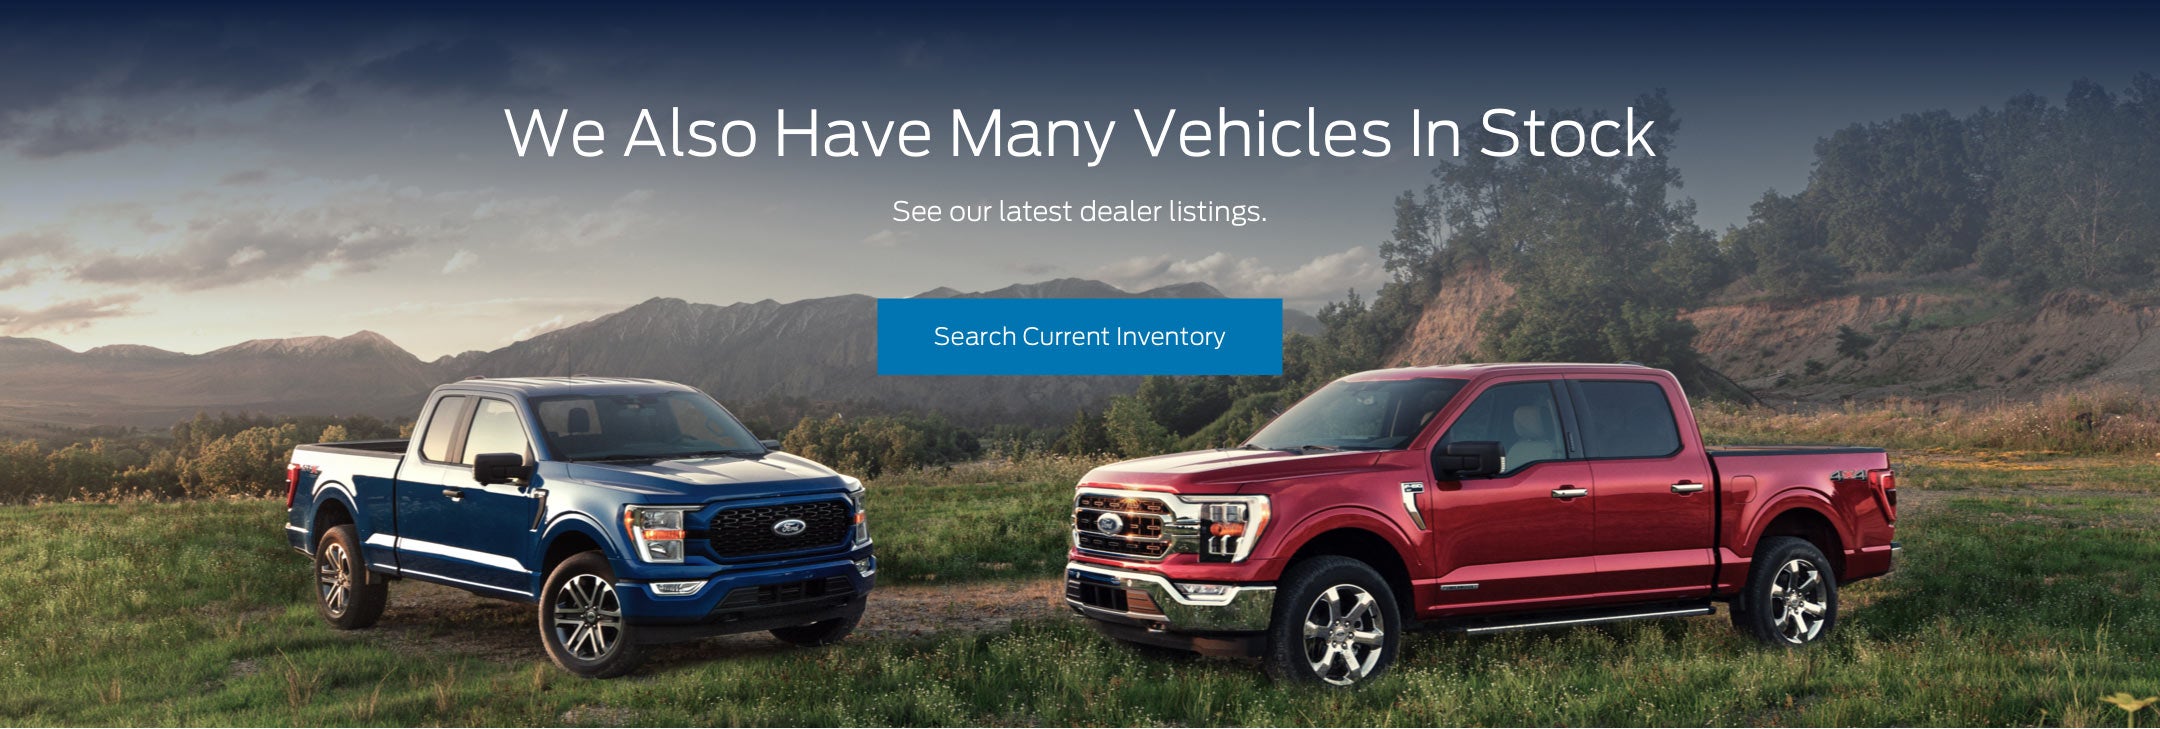 Ford vehicles in stock | LaFontaine Ford Grand Rapids in Grand Rapids MI